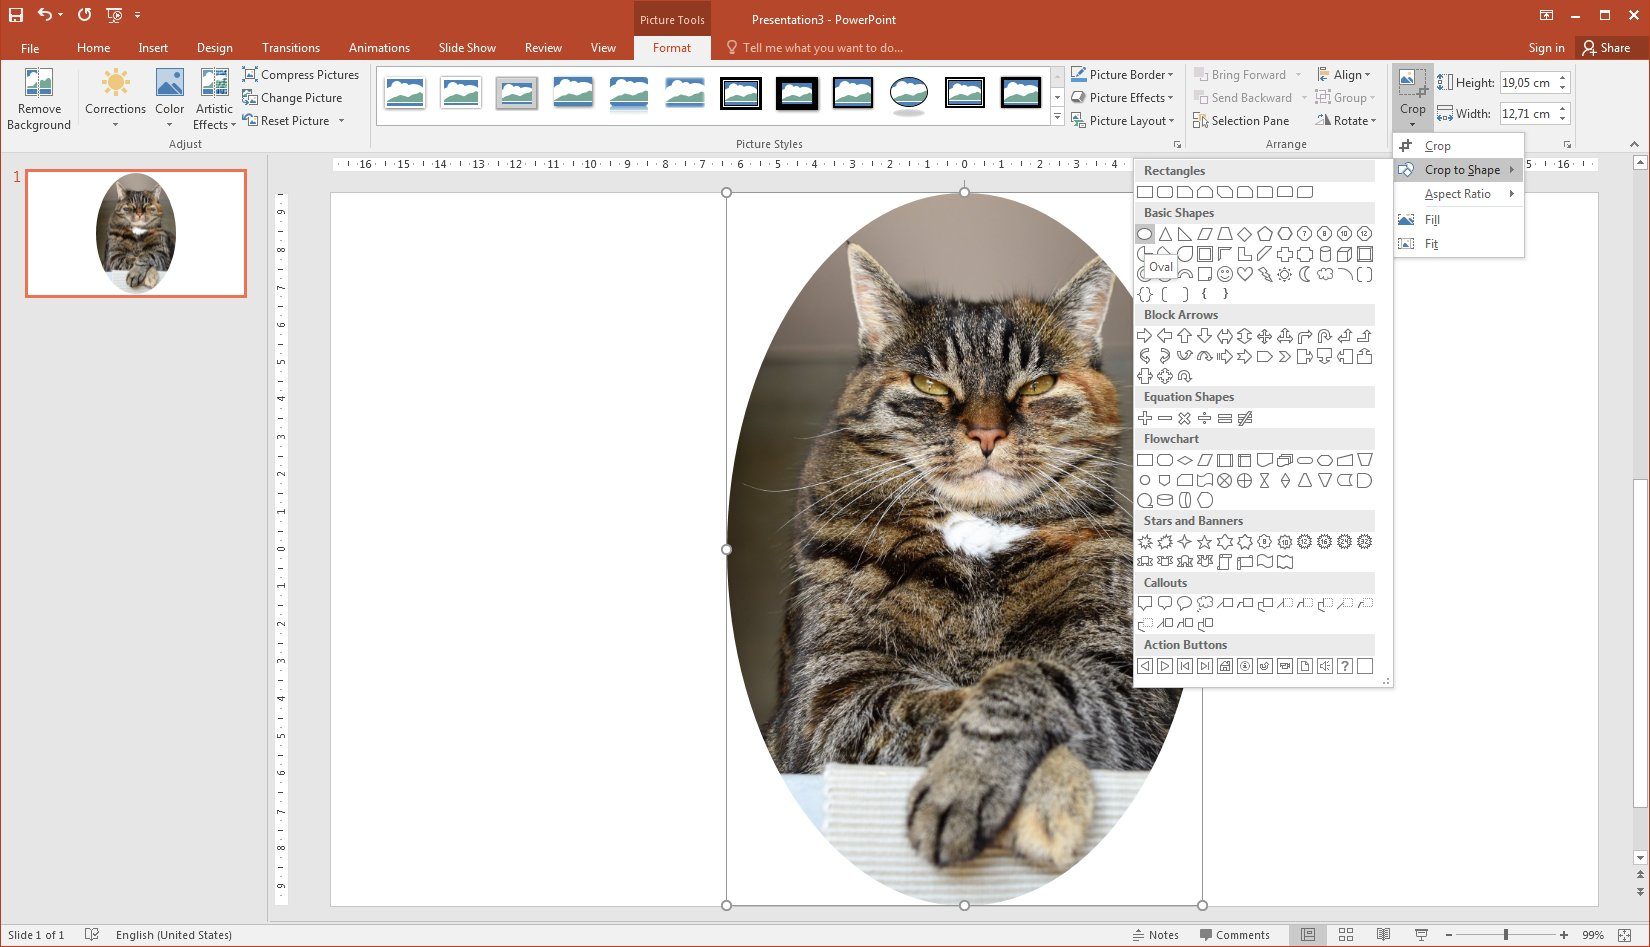 Image cropping: By default PowerPoint stretches your chosen shape to cover the entire image